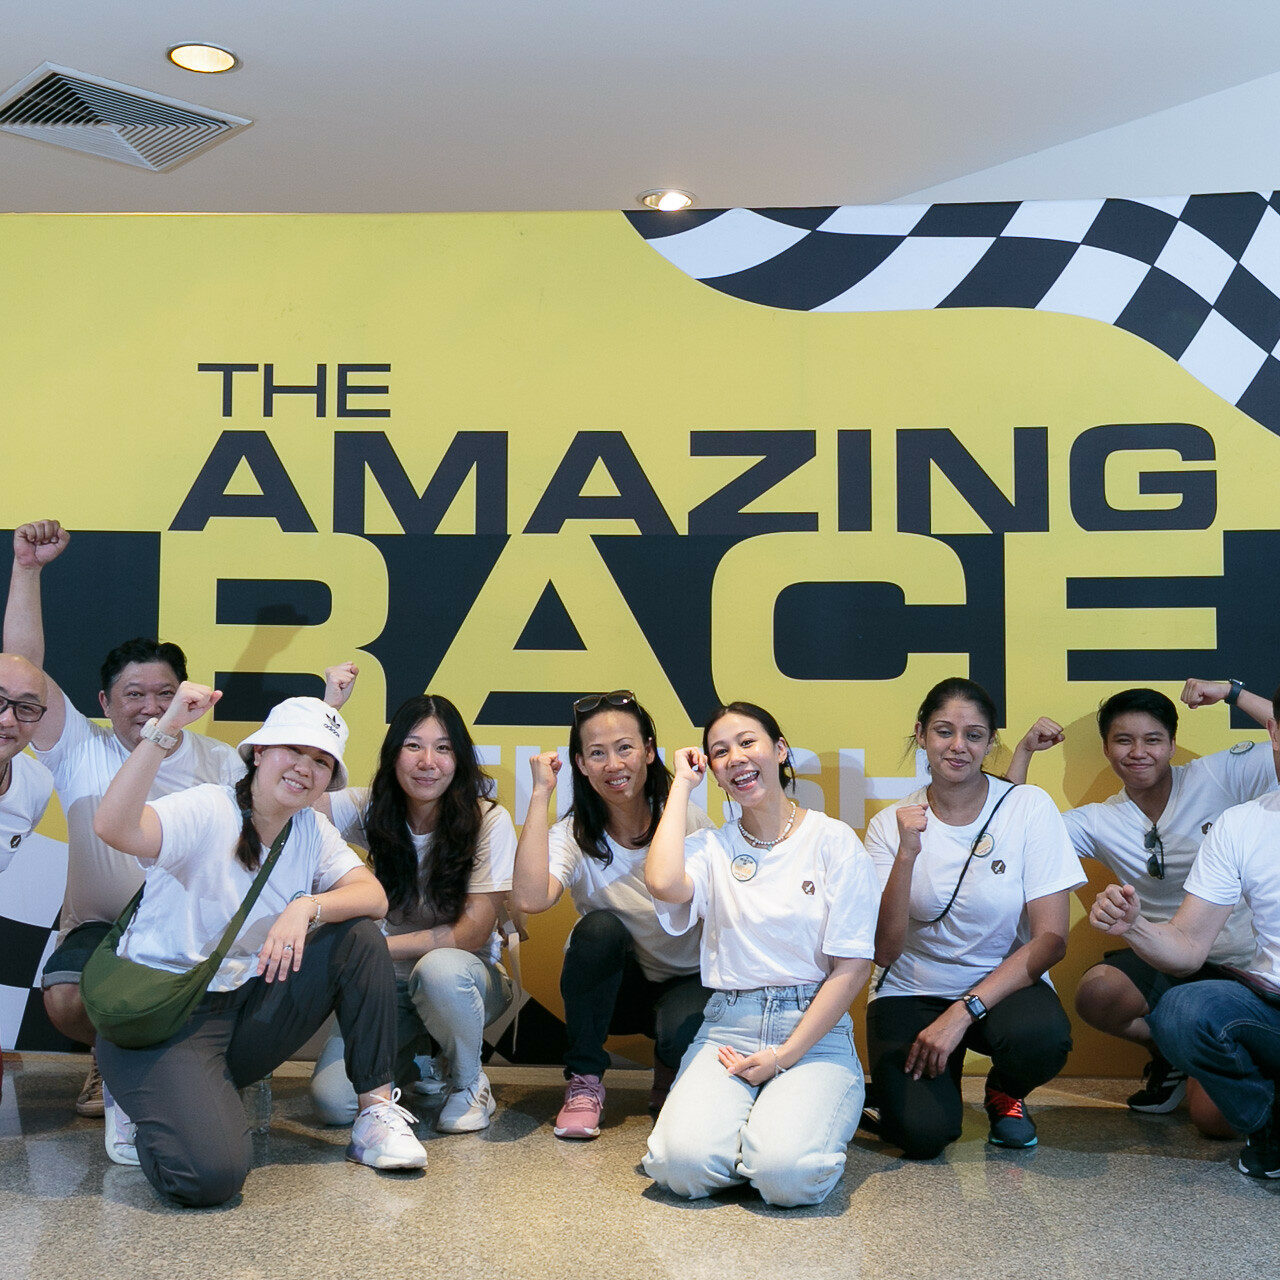 A race by minivans or public transport from challenge to challenge based on the famous TV-show The Amazing Race